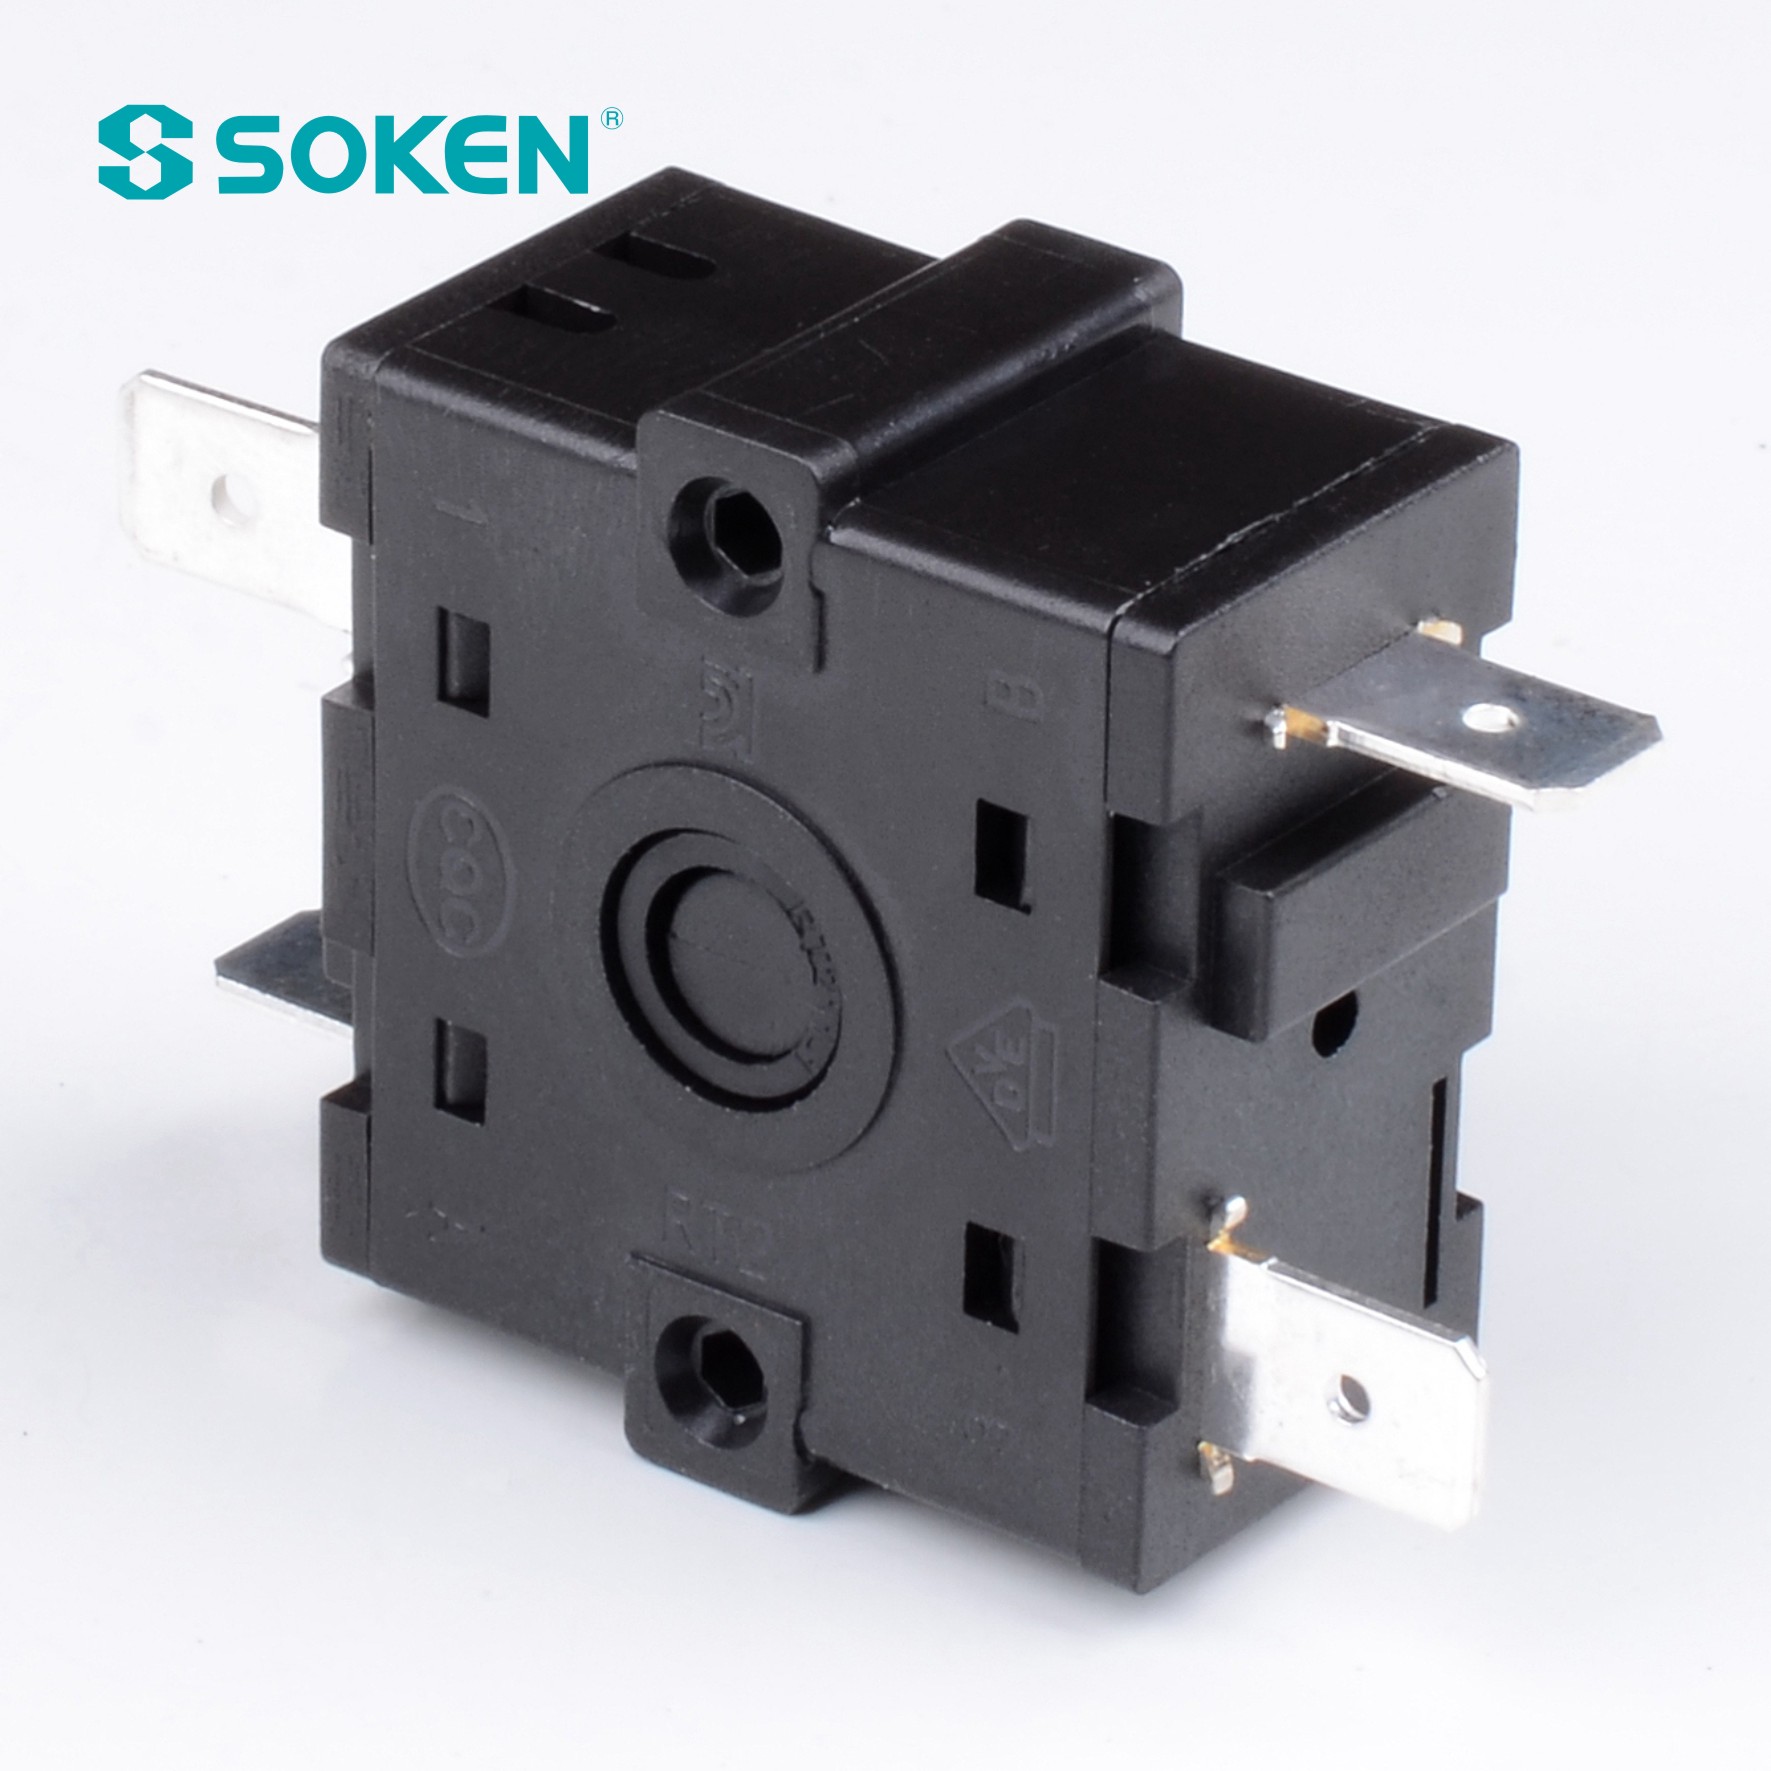 6 Position Rotary Switch for Appliances (RT253-1)